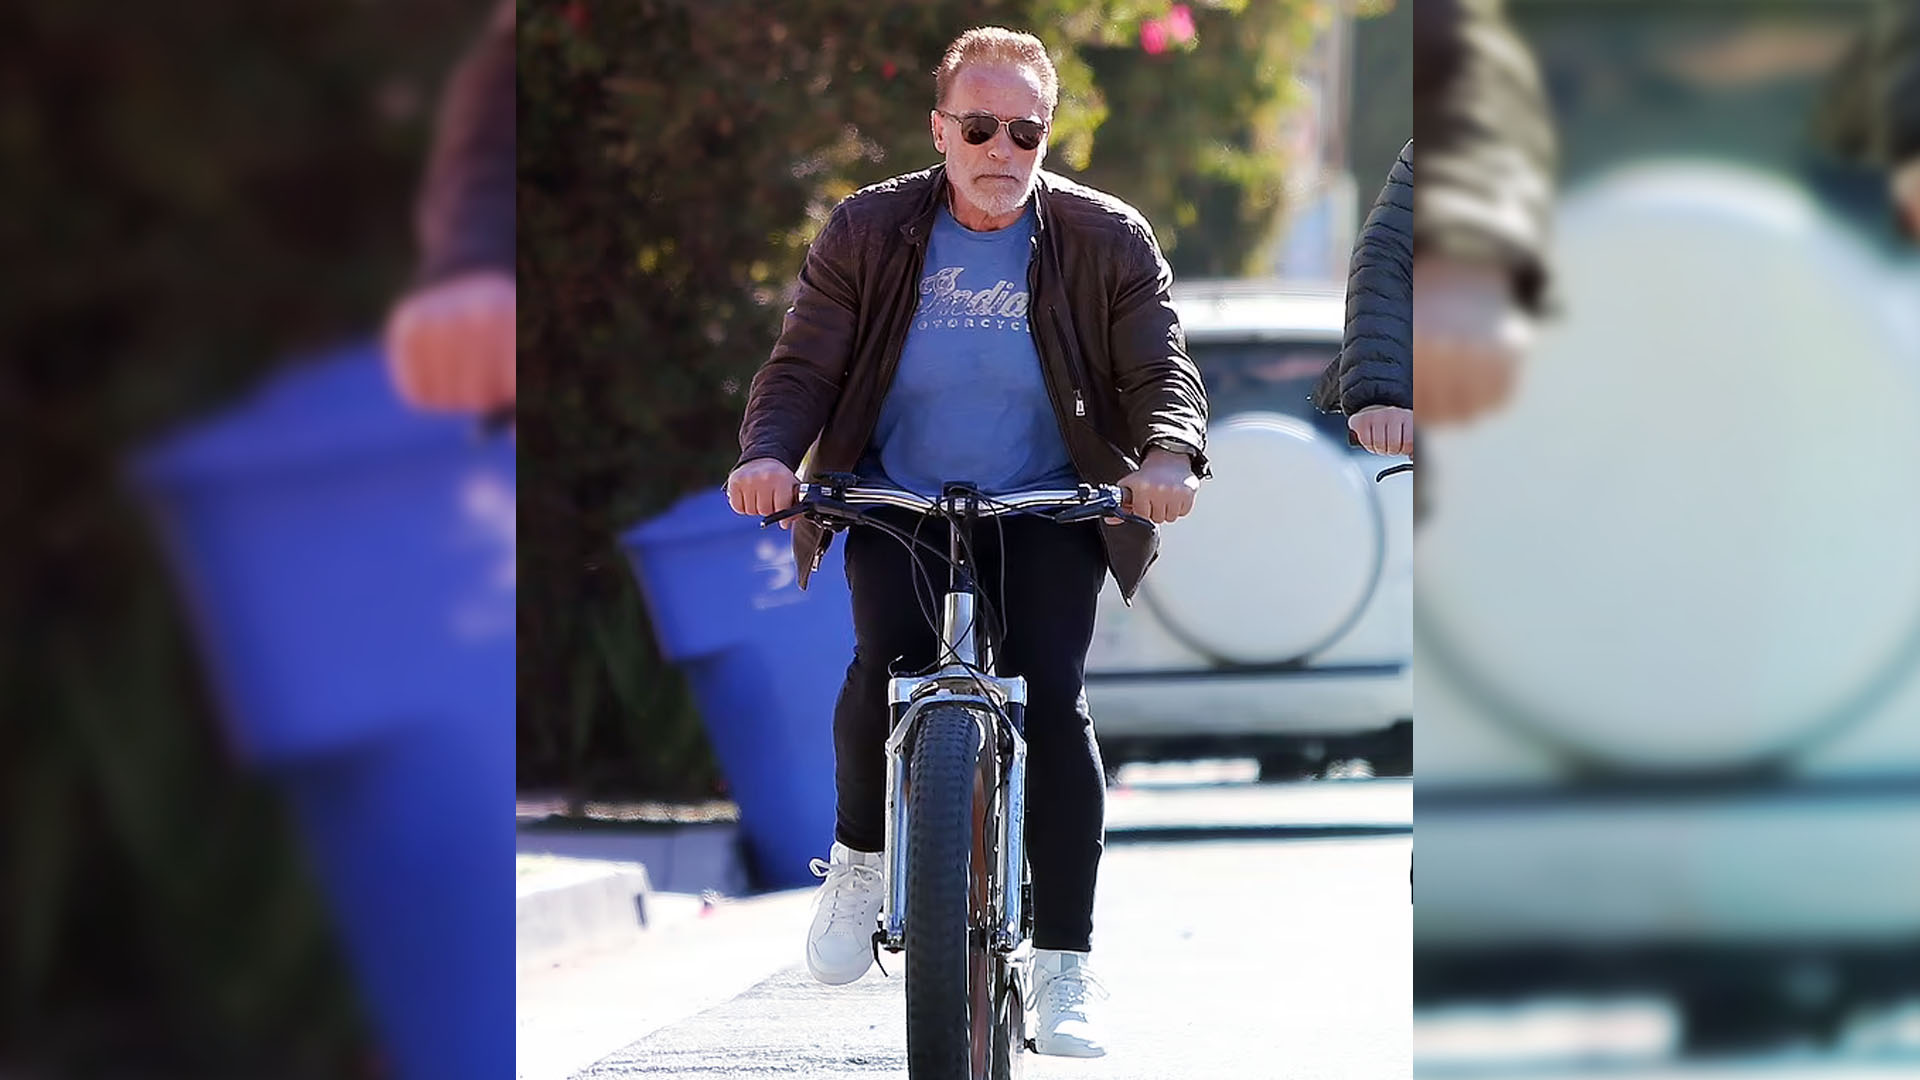 Arnold Schwarzenegger seen cycling in LA A days after car accident